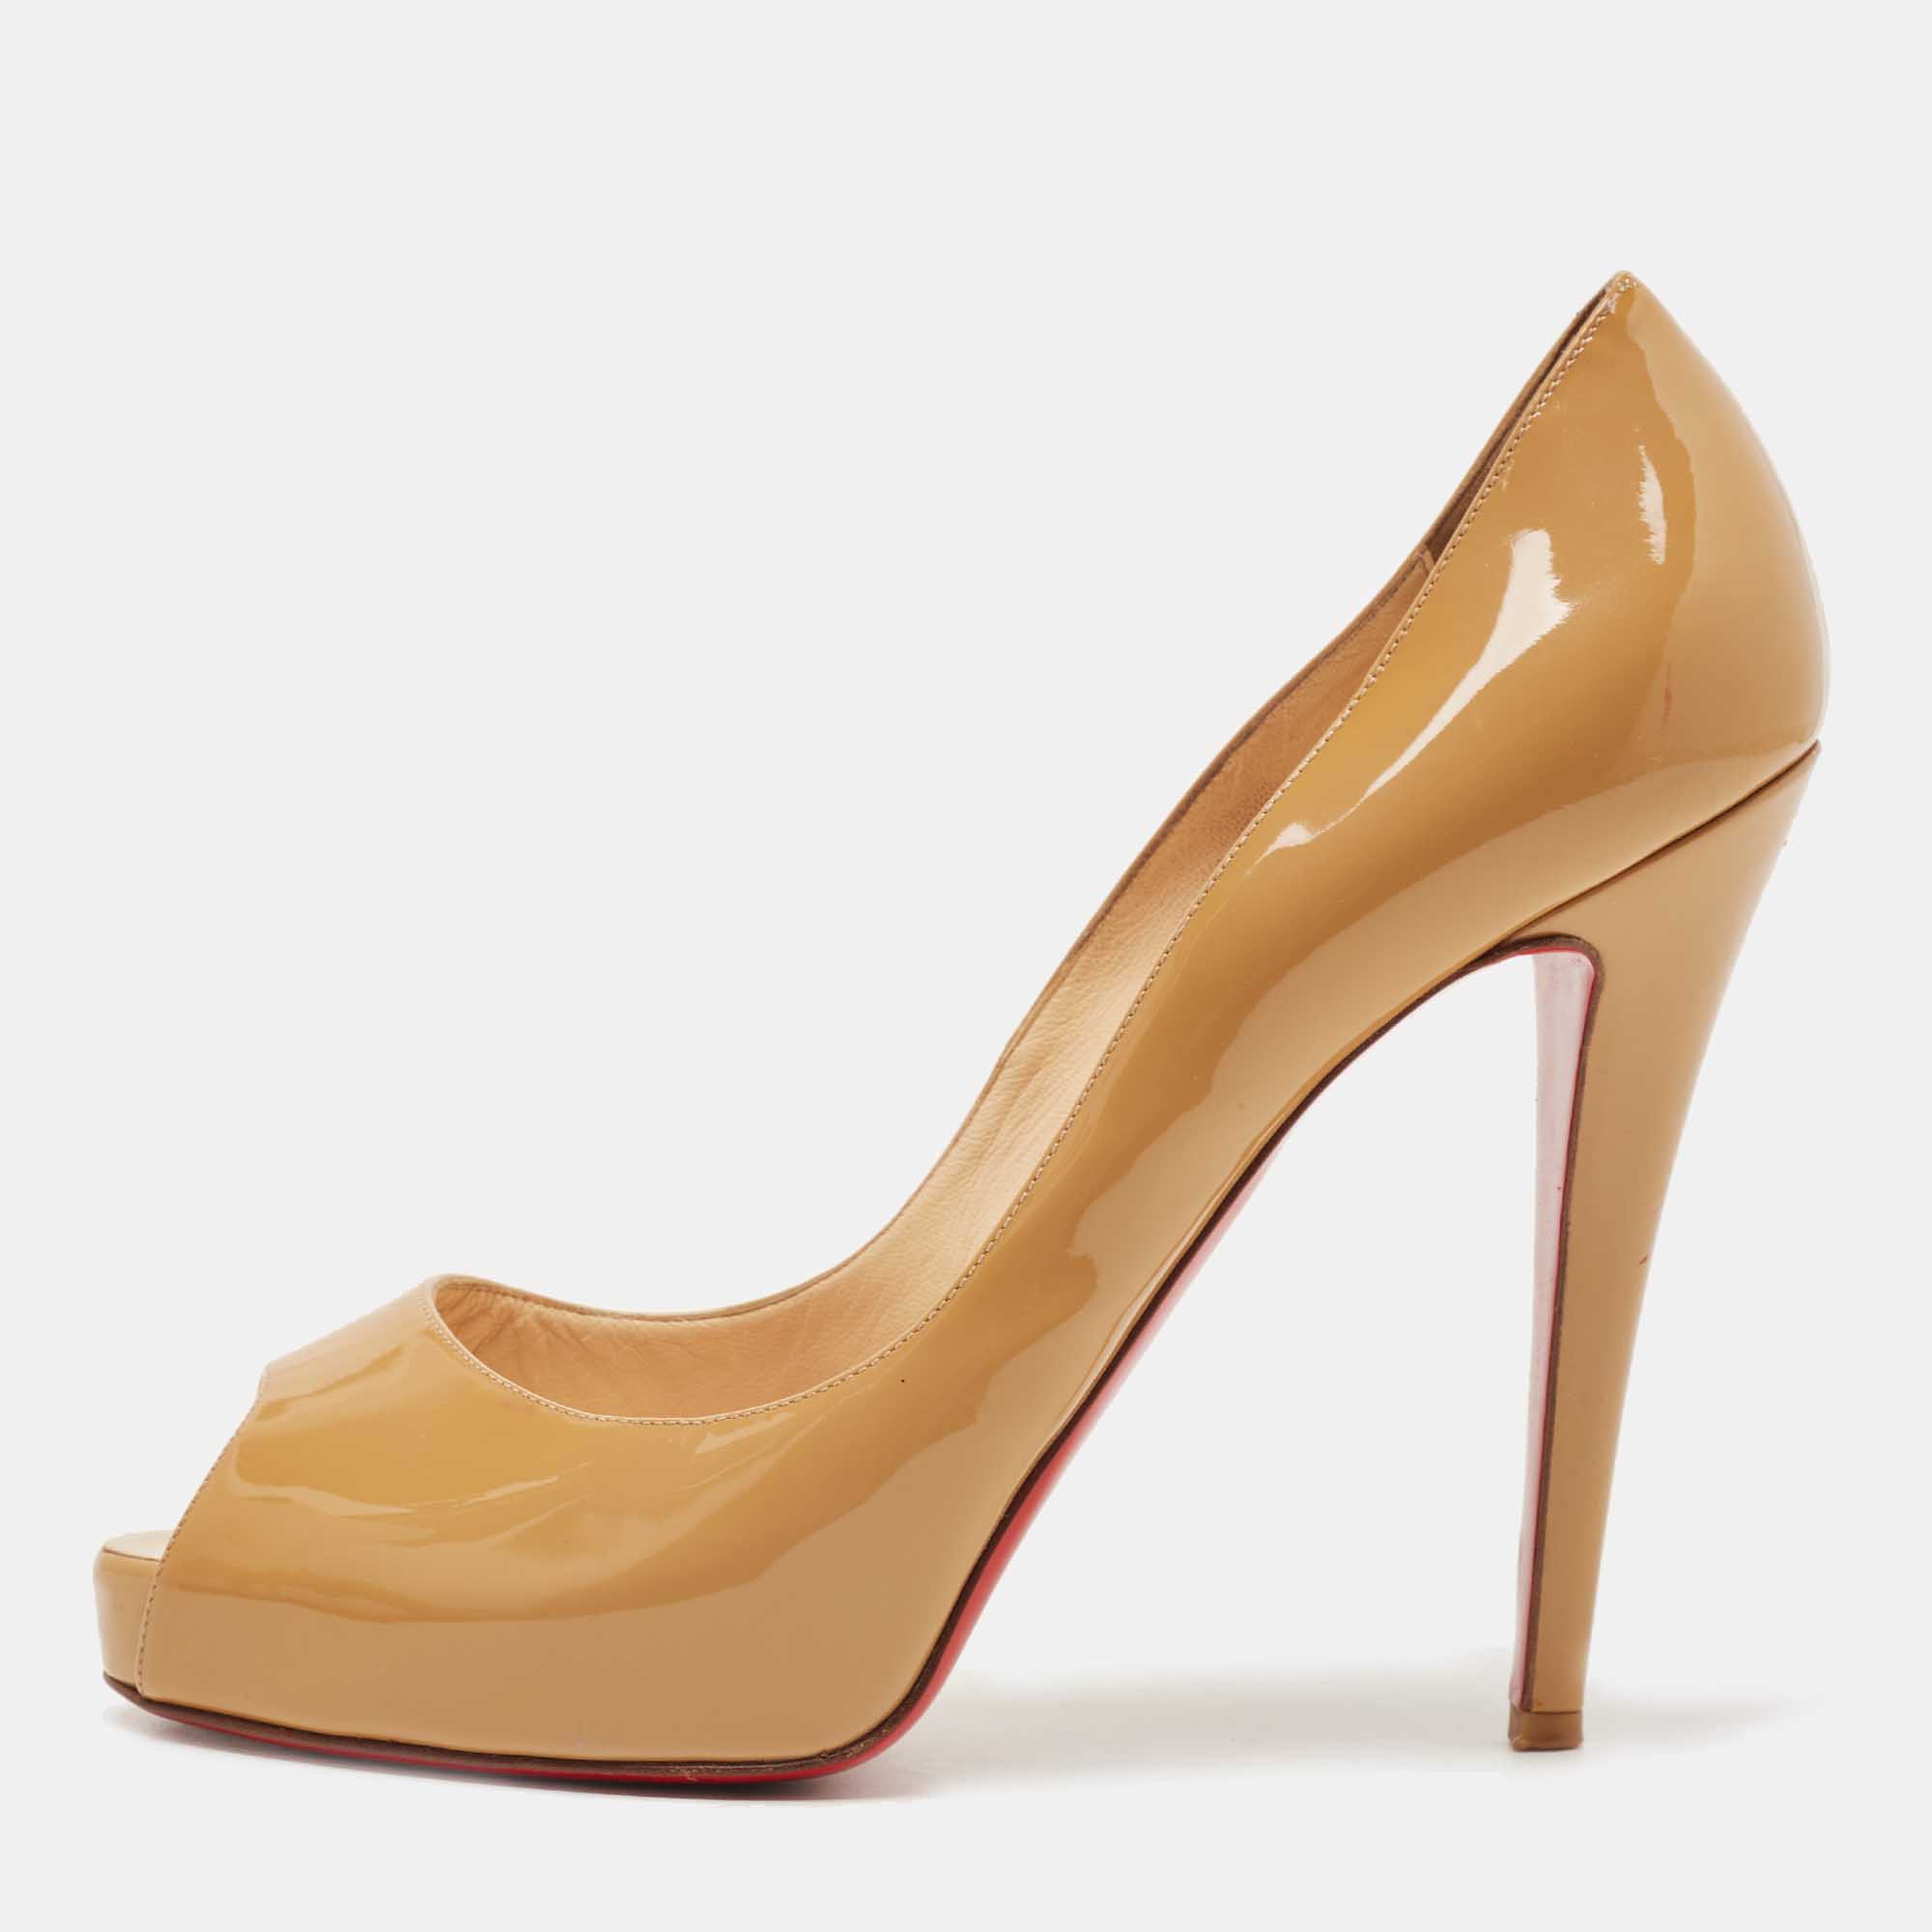 Pre-owned Christian Louboutin Beige Patent Leather Very Prive Pumps Size 40